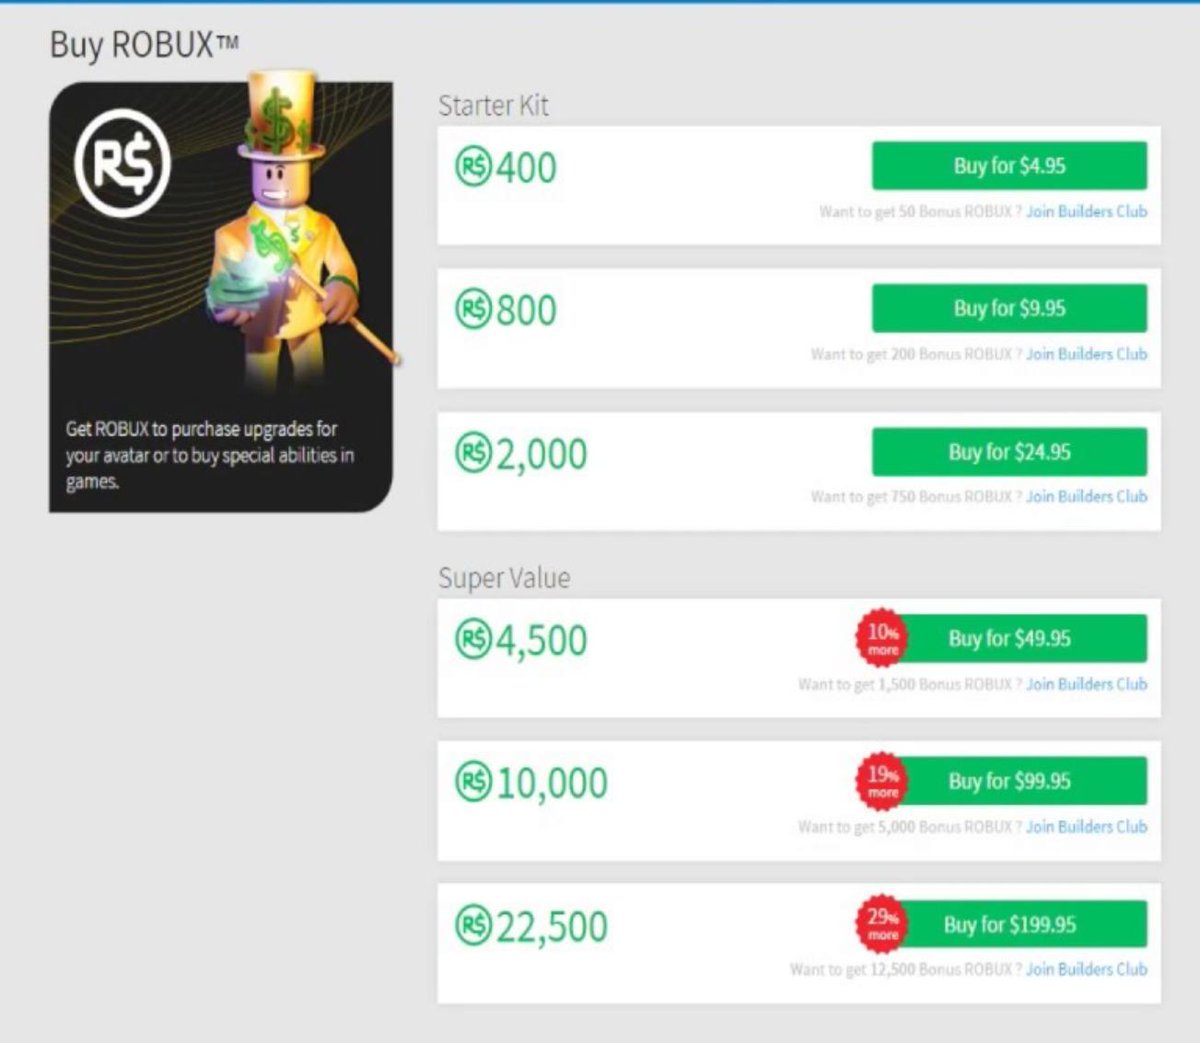 Kasodus On Twitter Roblox Lowered The Bonus Robux You Get When - if you have builders club as well as removed the 22 500 35 000 robux option without anyone even noticing the second picture is the old version of the